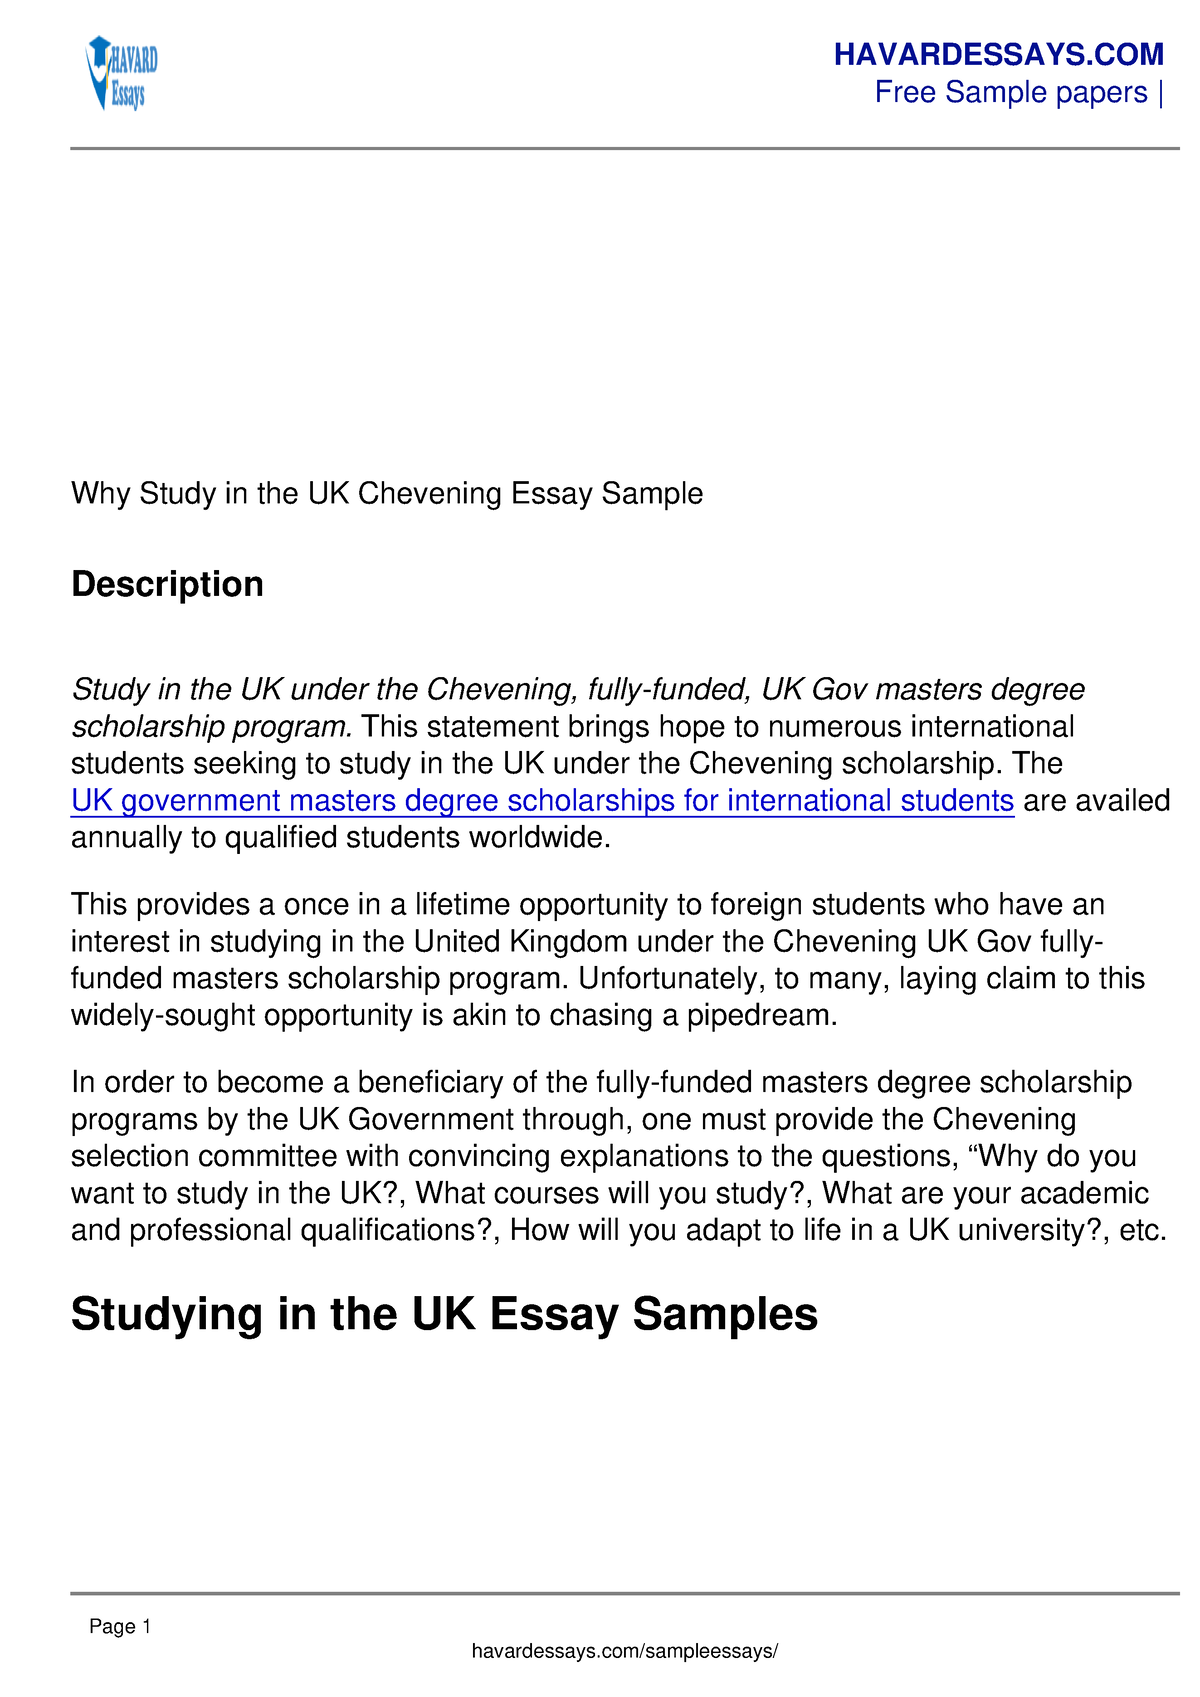 essay questions in chevening